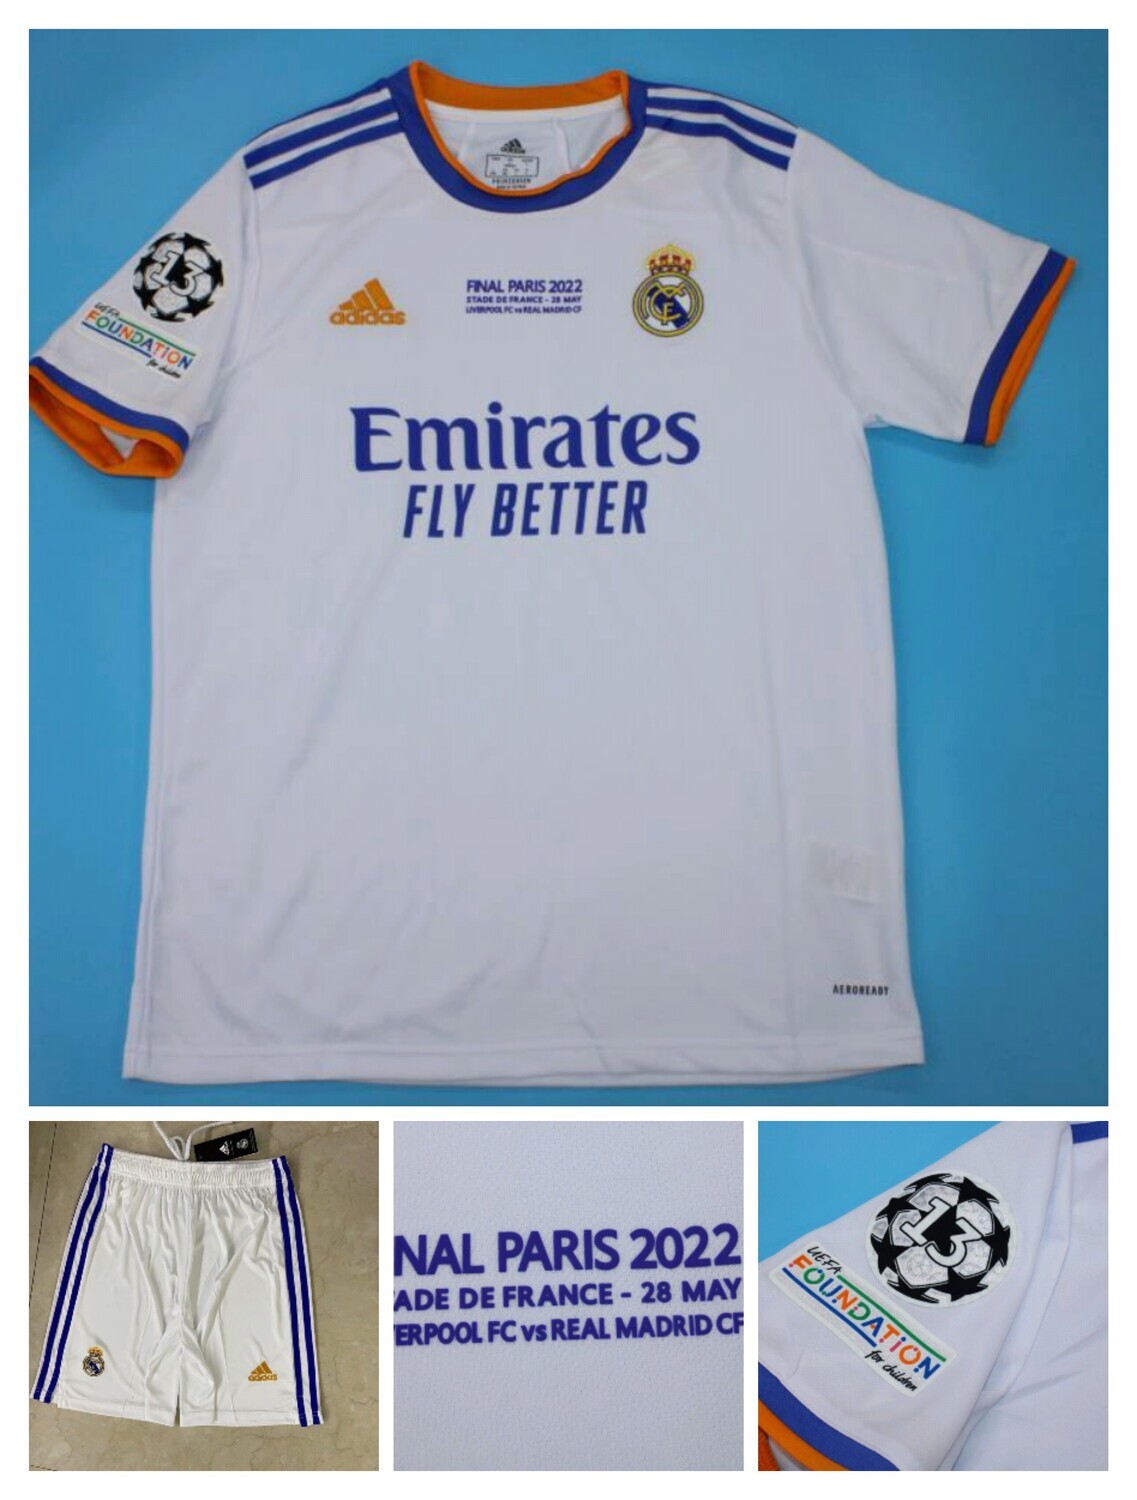 REAL MADRID MAGLIA JERSEY FINAL CHAMPIONS 2022 FINALE CHAMPIONS 22 version player match